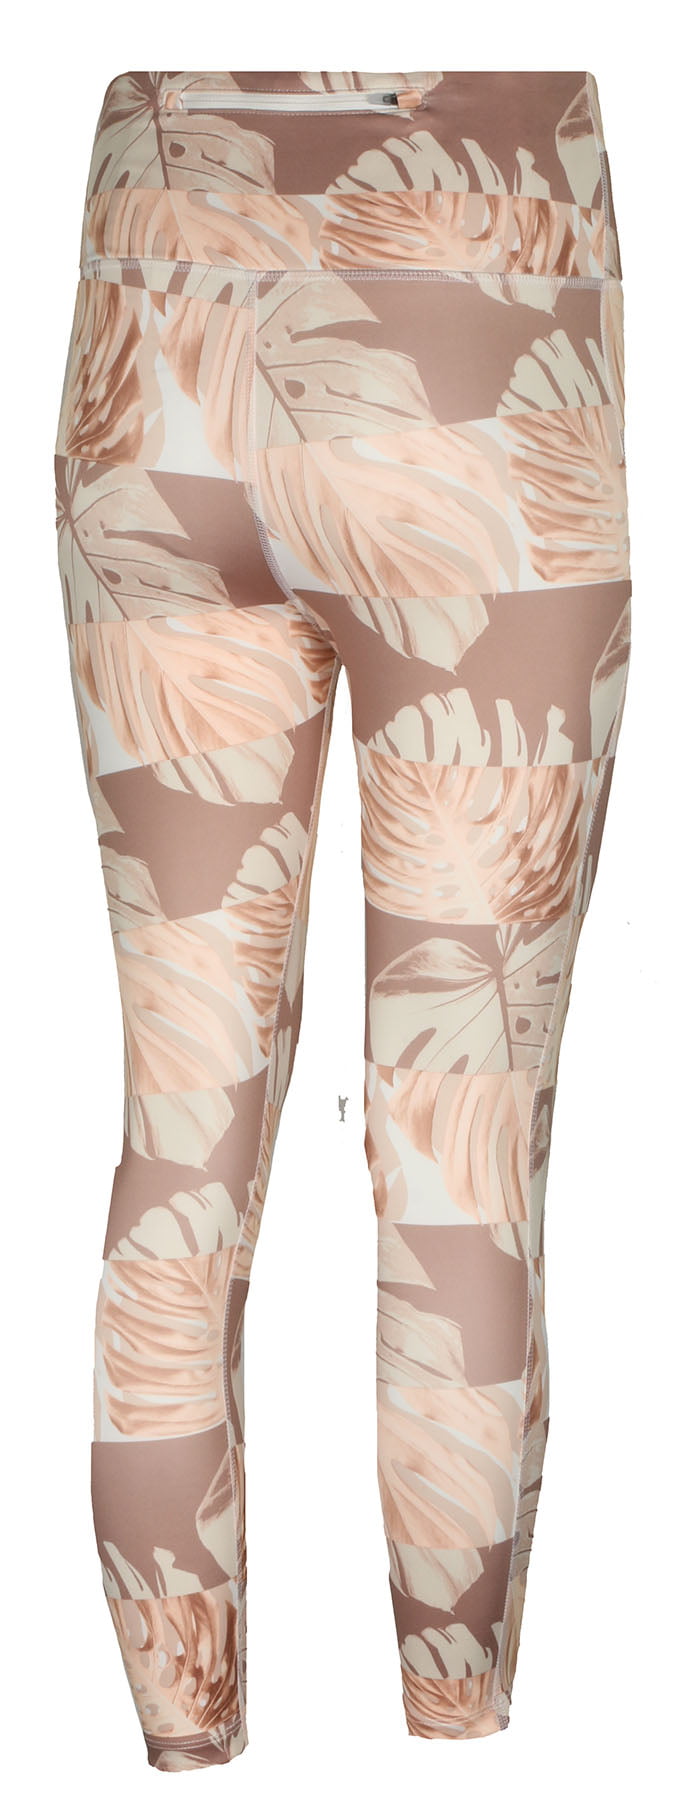 Nike Dry Women's Botanical Print Fast Crop Tight fit Leggings CJ2162 654 SIZE  Large New with tag 